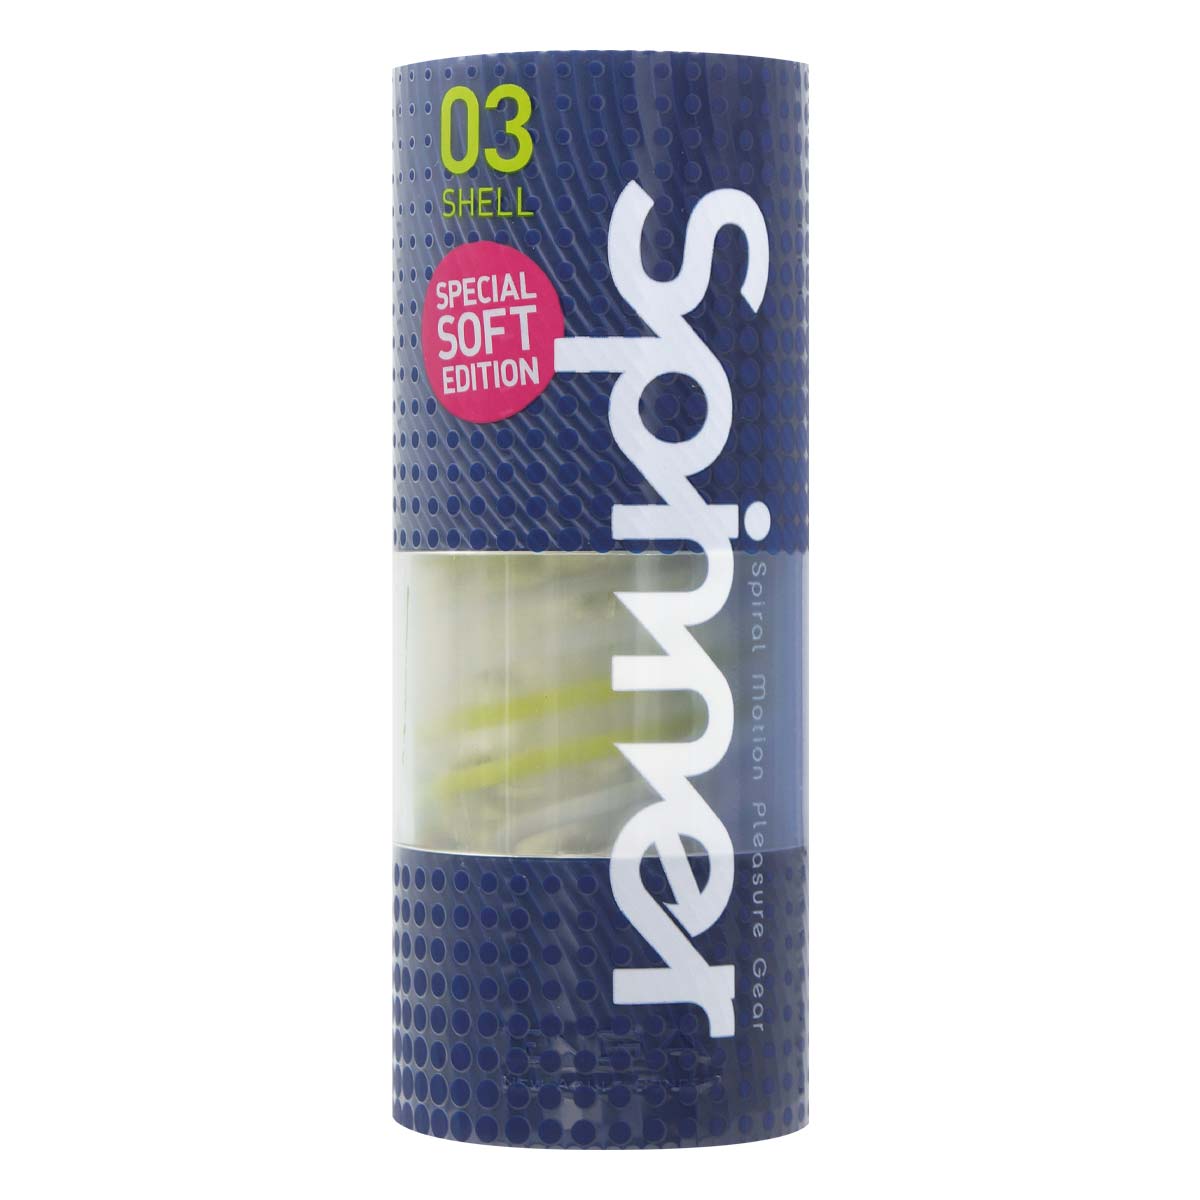 TENGA SPINNER SHELL SPECIAL SOFT EDITION-p_2